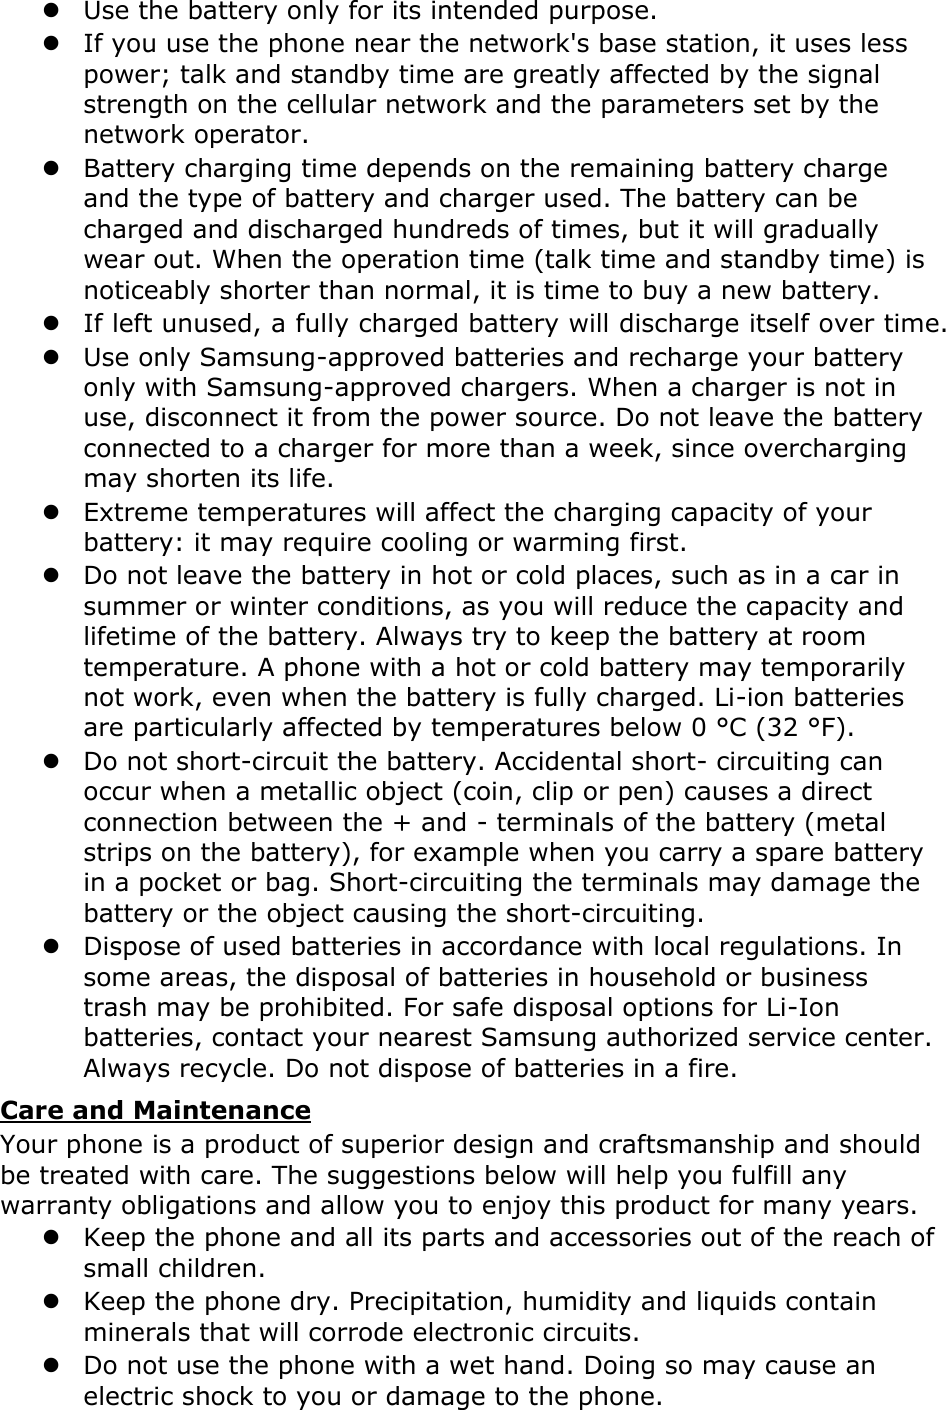 Page 19 of Samsung Electronics Co GTS3850 Cellular/PCS GSM Phone with WLAN and Bluetooth User Manual